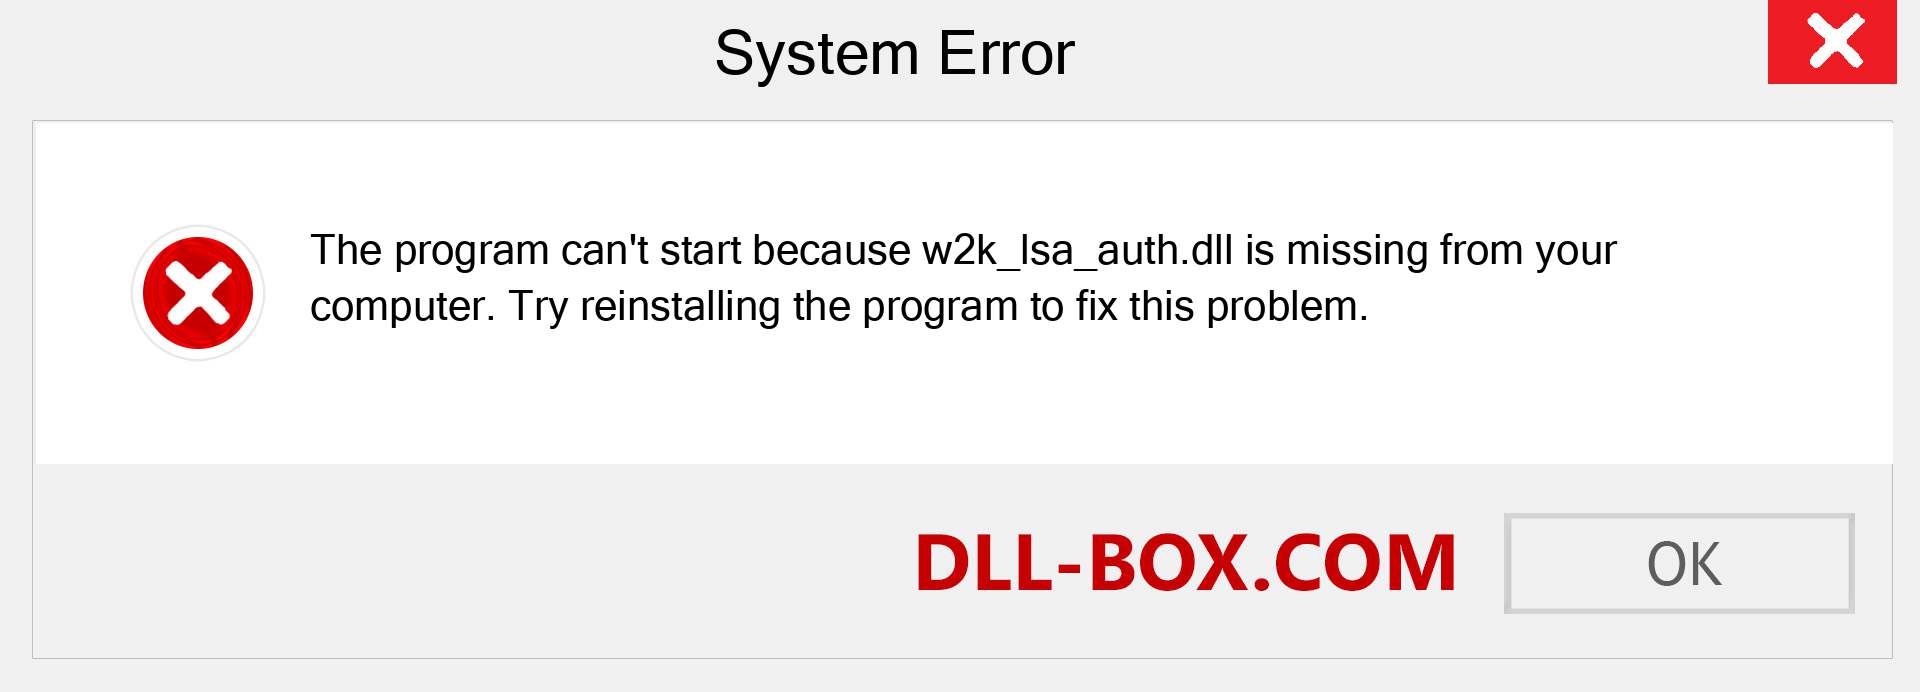  w2k_lsa_auth.dll file is missing?. Download for Windows 7, 8, 10 - Fix  w2k_lsa_auth dll Missing Error on Windows, photos, images